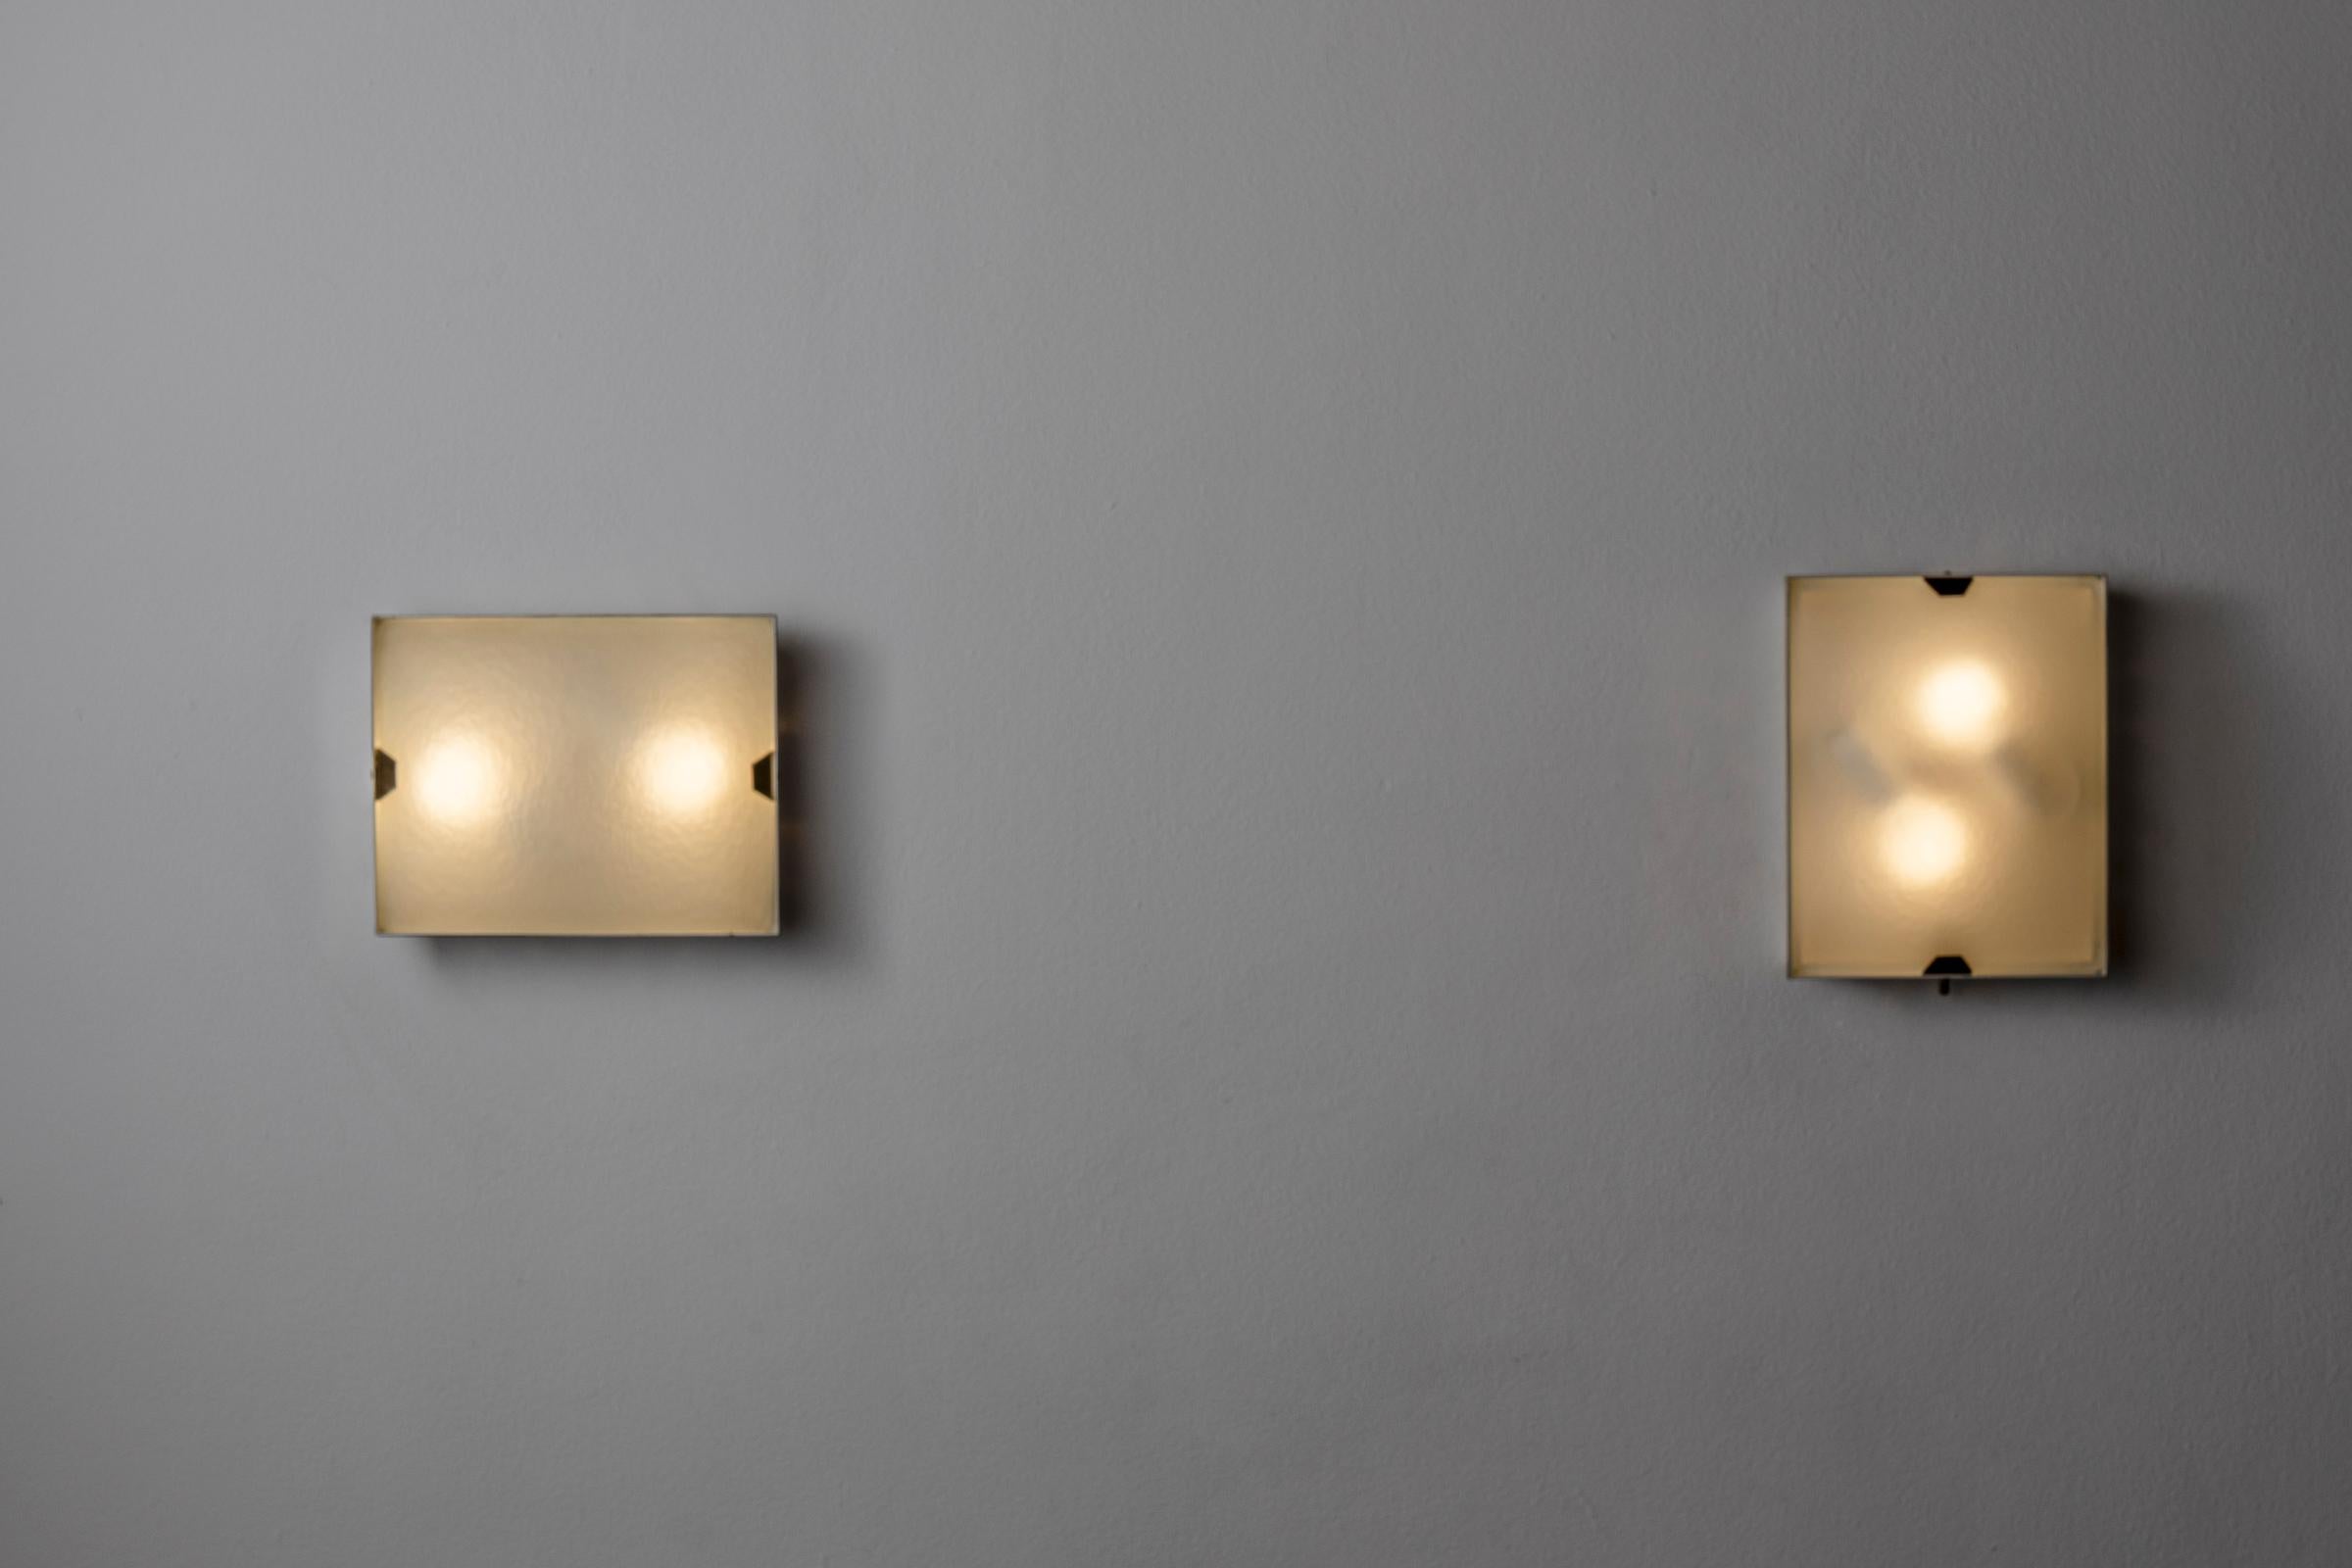 Unique Pair of sconces by Stilnovo. Manufactured in Italy, circa 1950's. Brass, glass. Wired for U.S. standards. We recommend two E14 60w maximum bulbs per fixture. Bulbs not included.